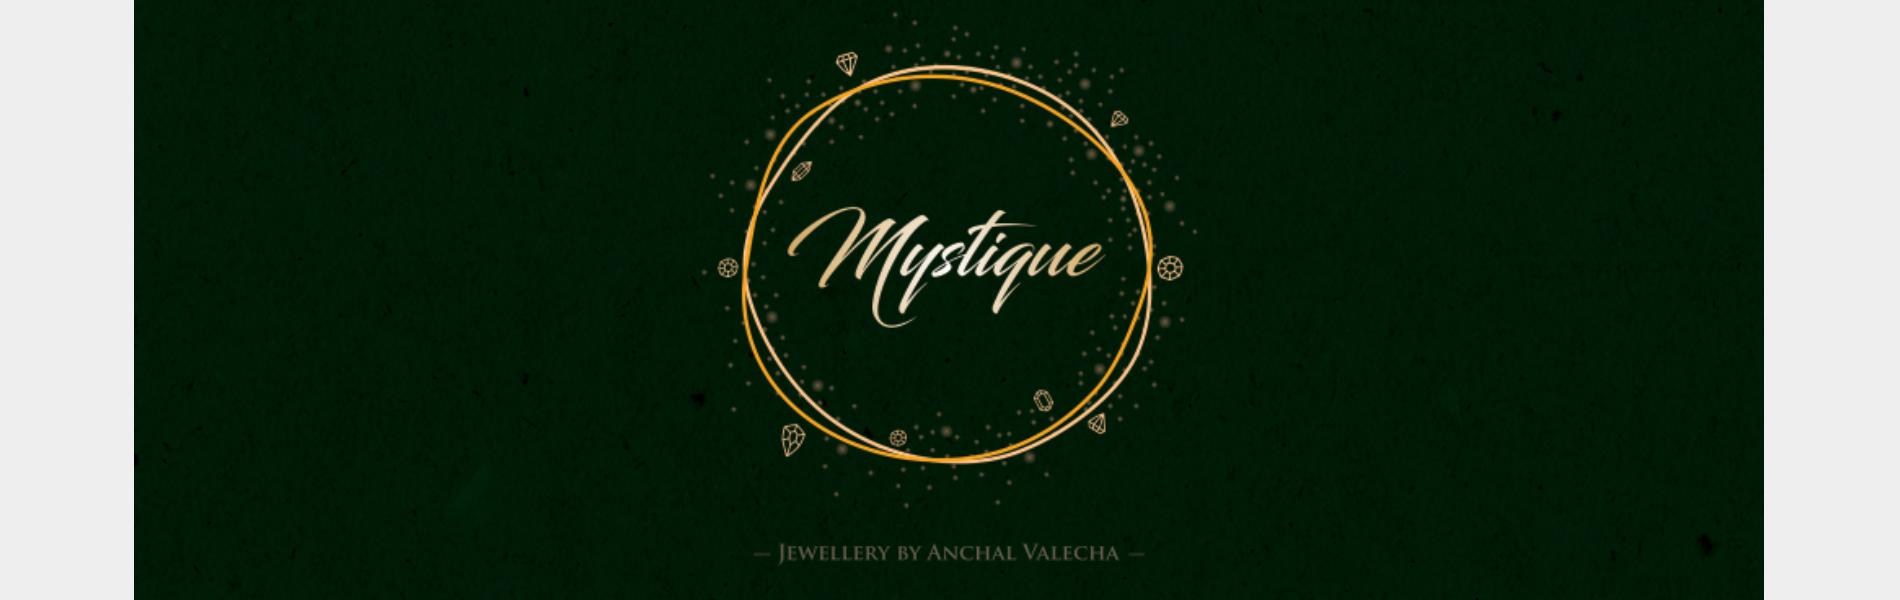 Mystique by Anchal